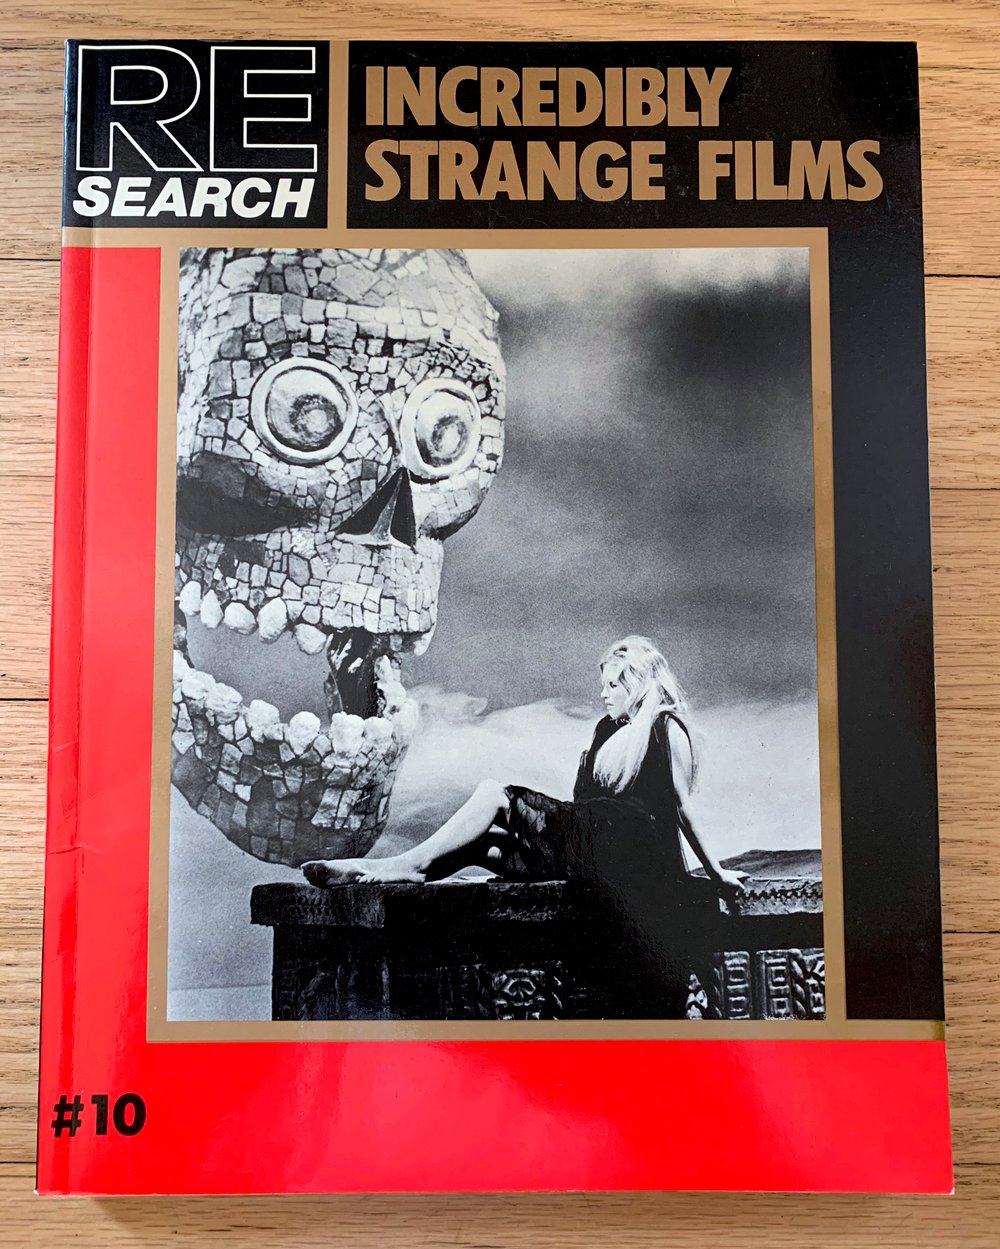 1986 RE/SEARCH #10: INCREDIBLY STRANGE FILMS Softcover book